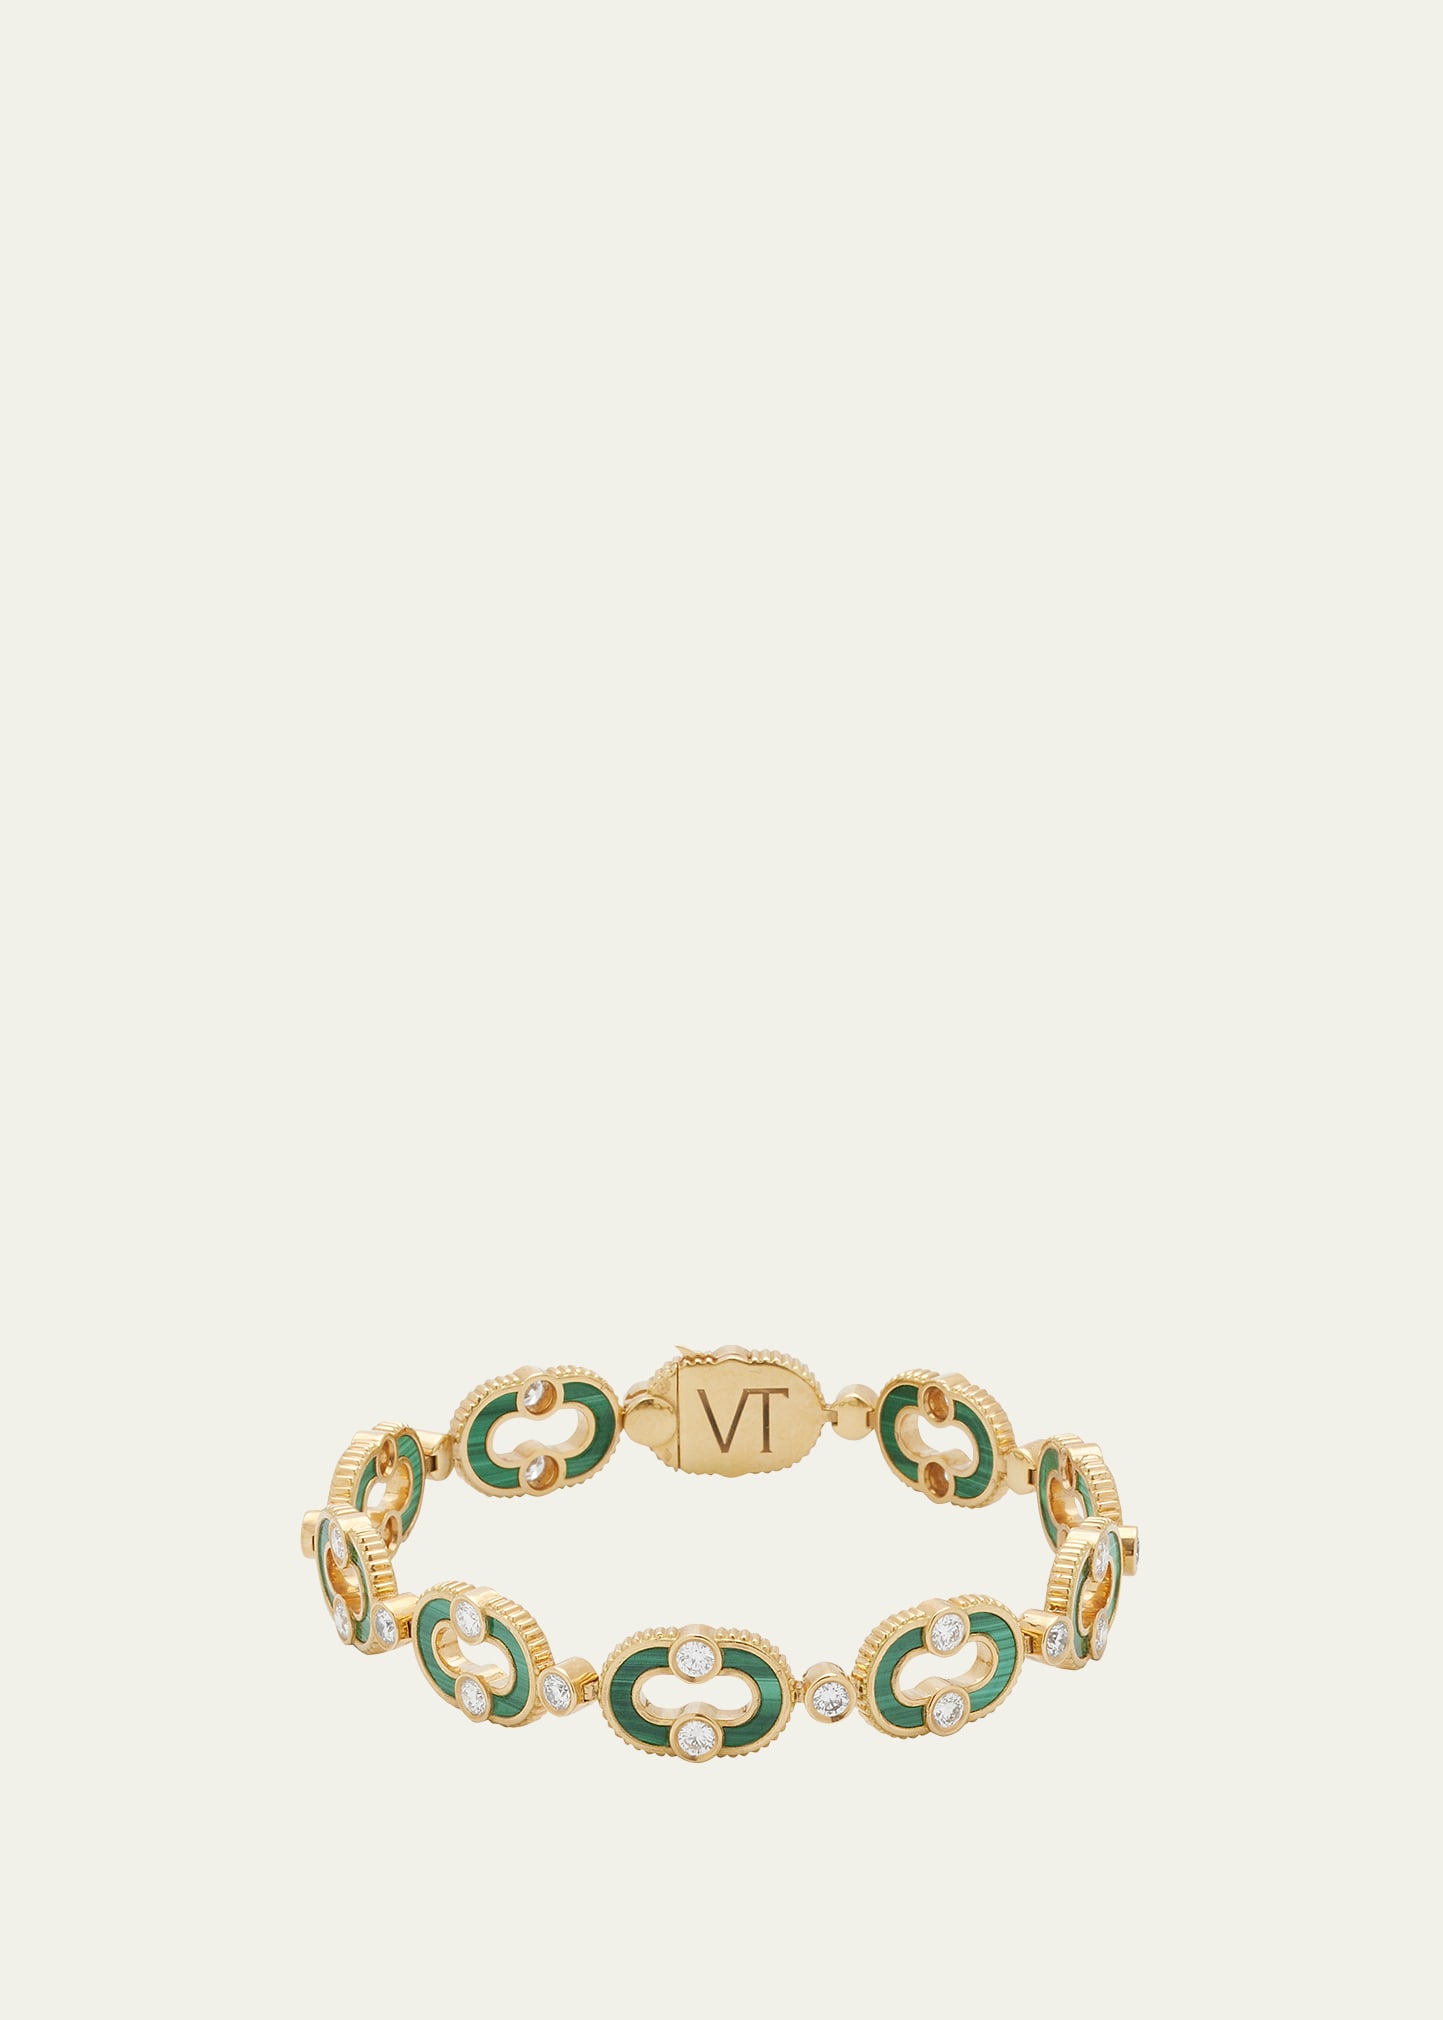 Magnetic Enchaine Malachite Bracelet in 18K Yellow Gold and Diamonds